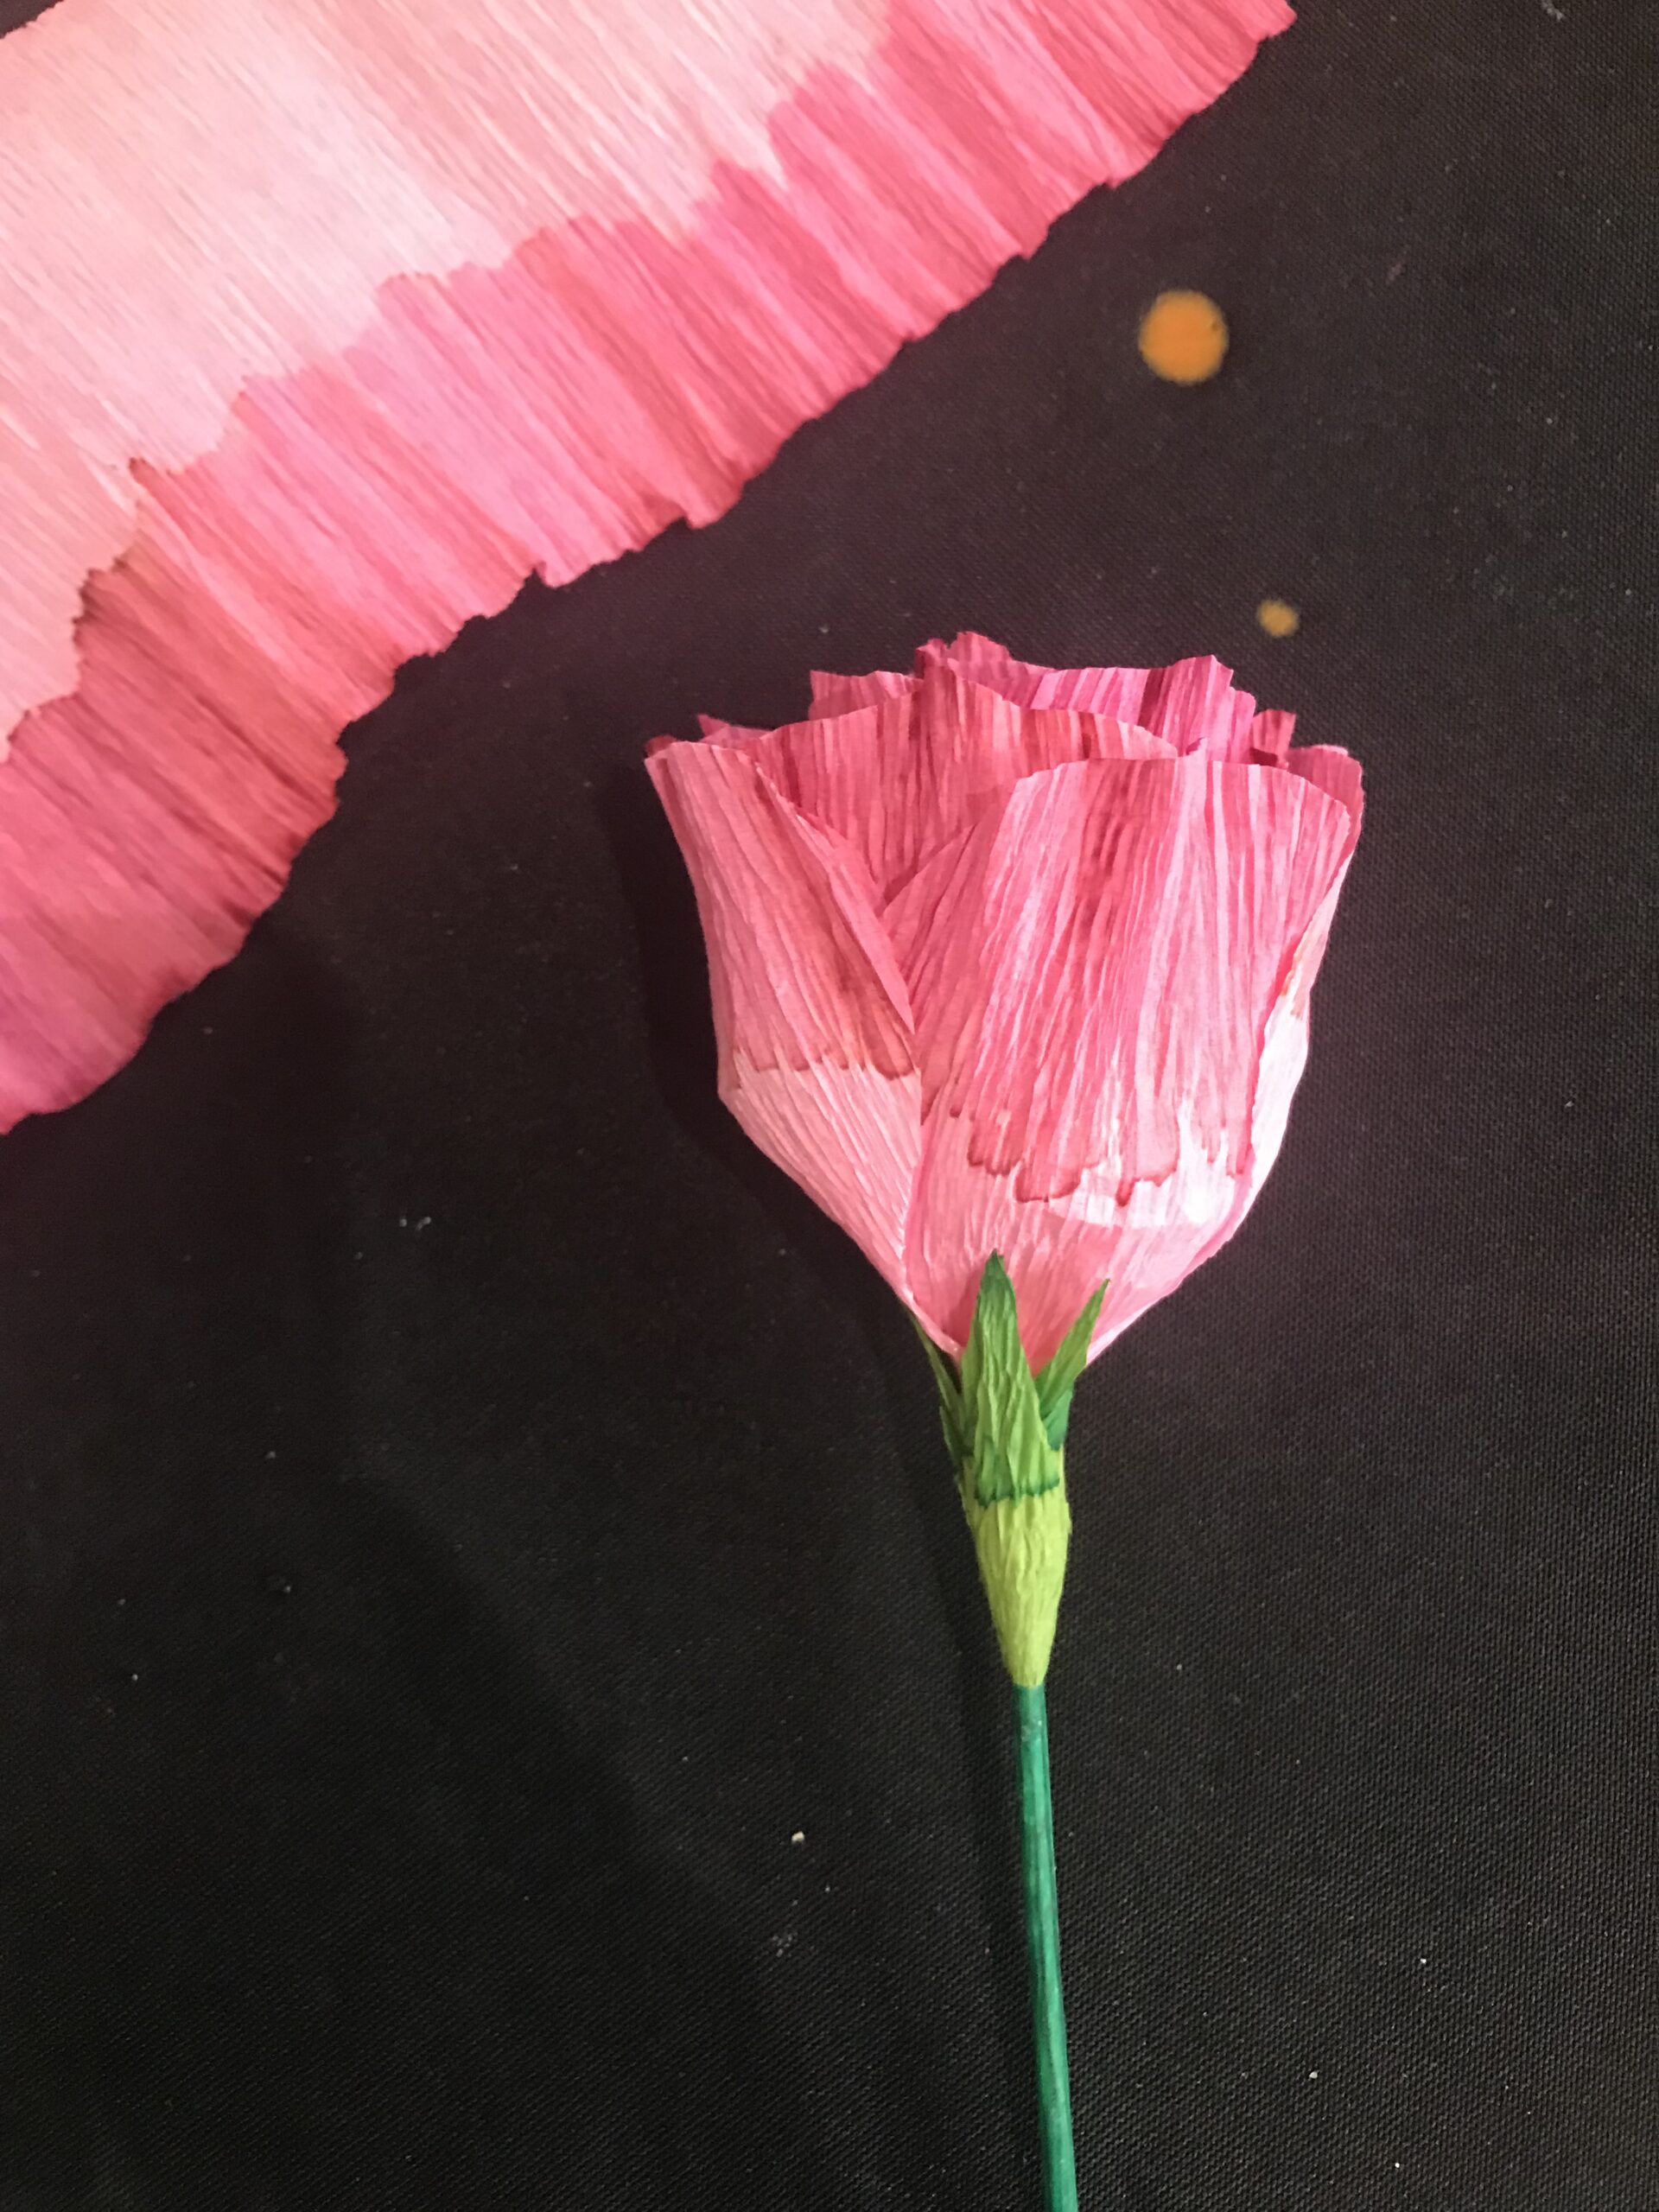 A pink paper rose with a green stem